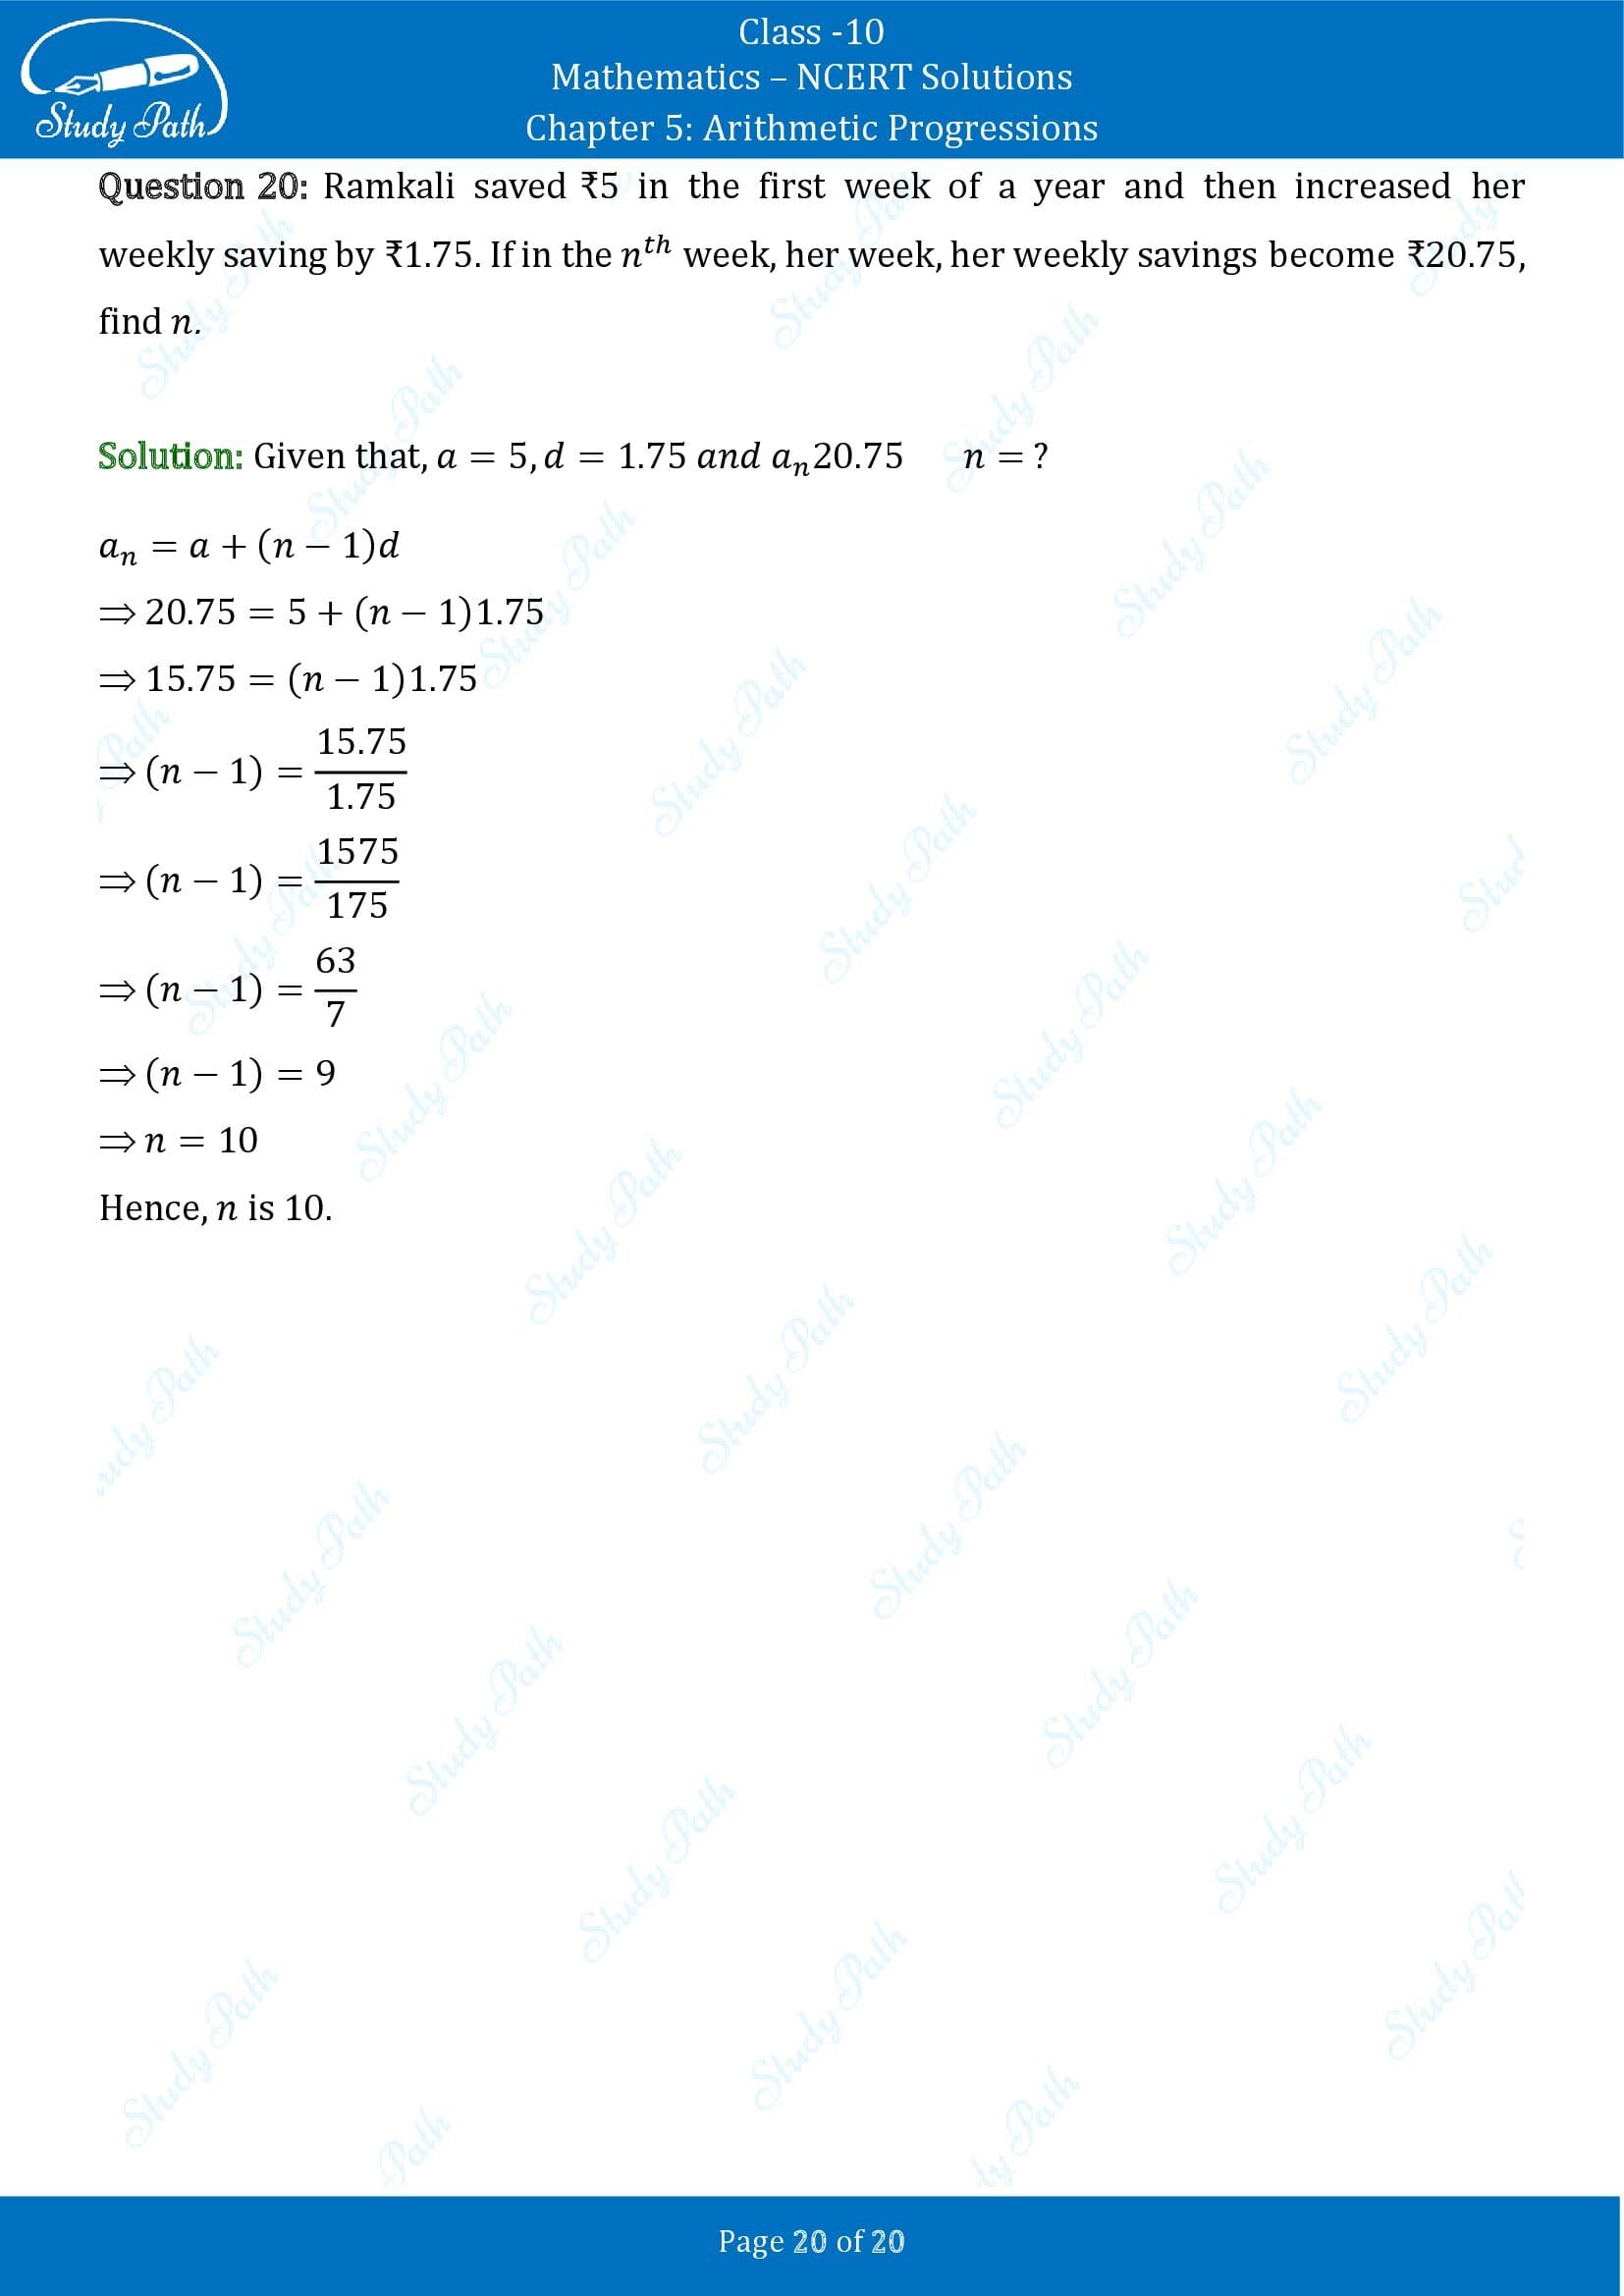 NCERT Solutions for Class 10 Maths Chapter 5 Arithmetic Progressions Exercise 5.2 00020